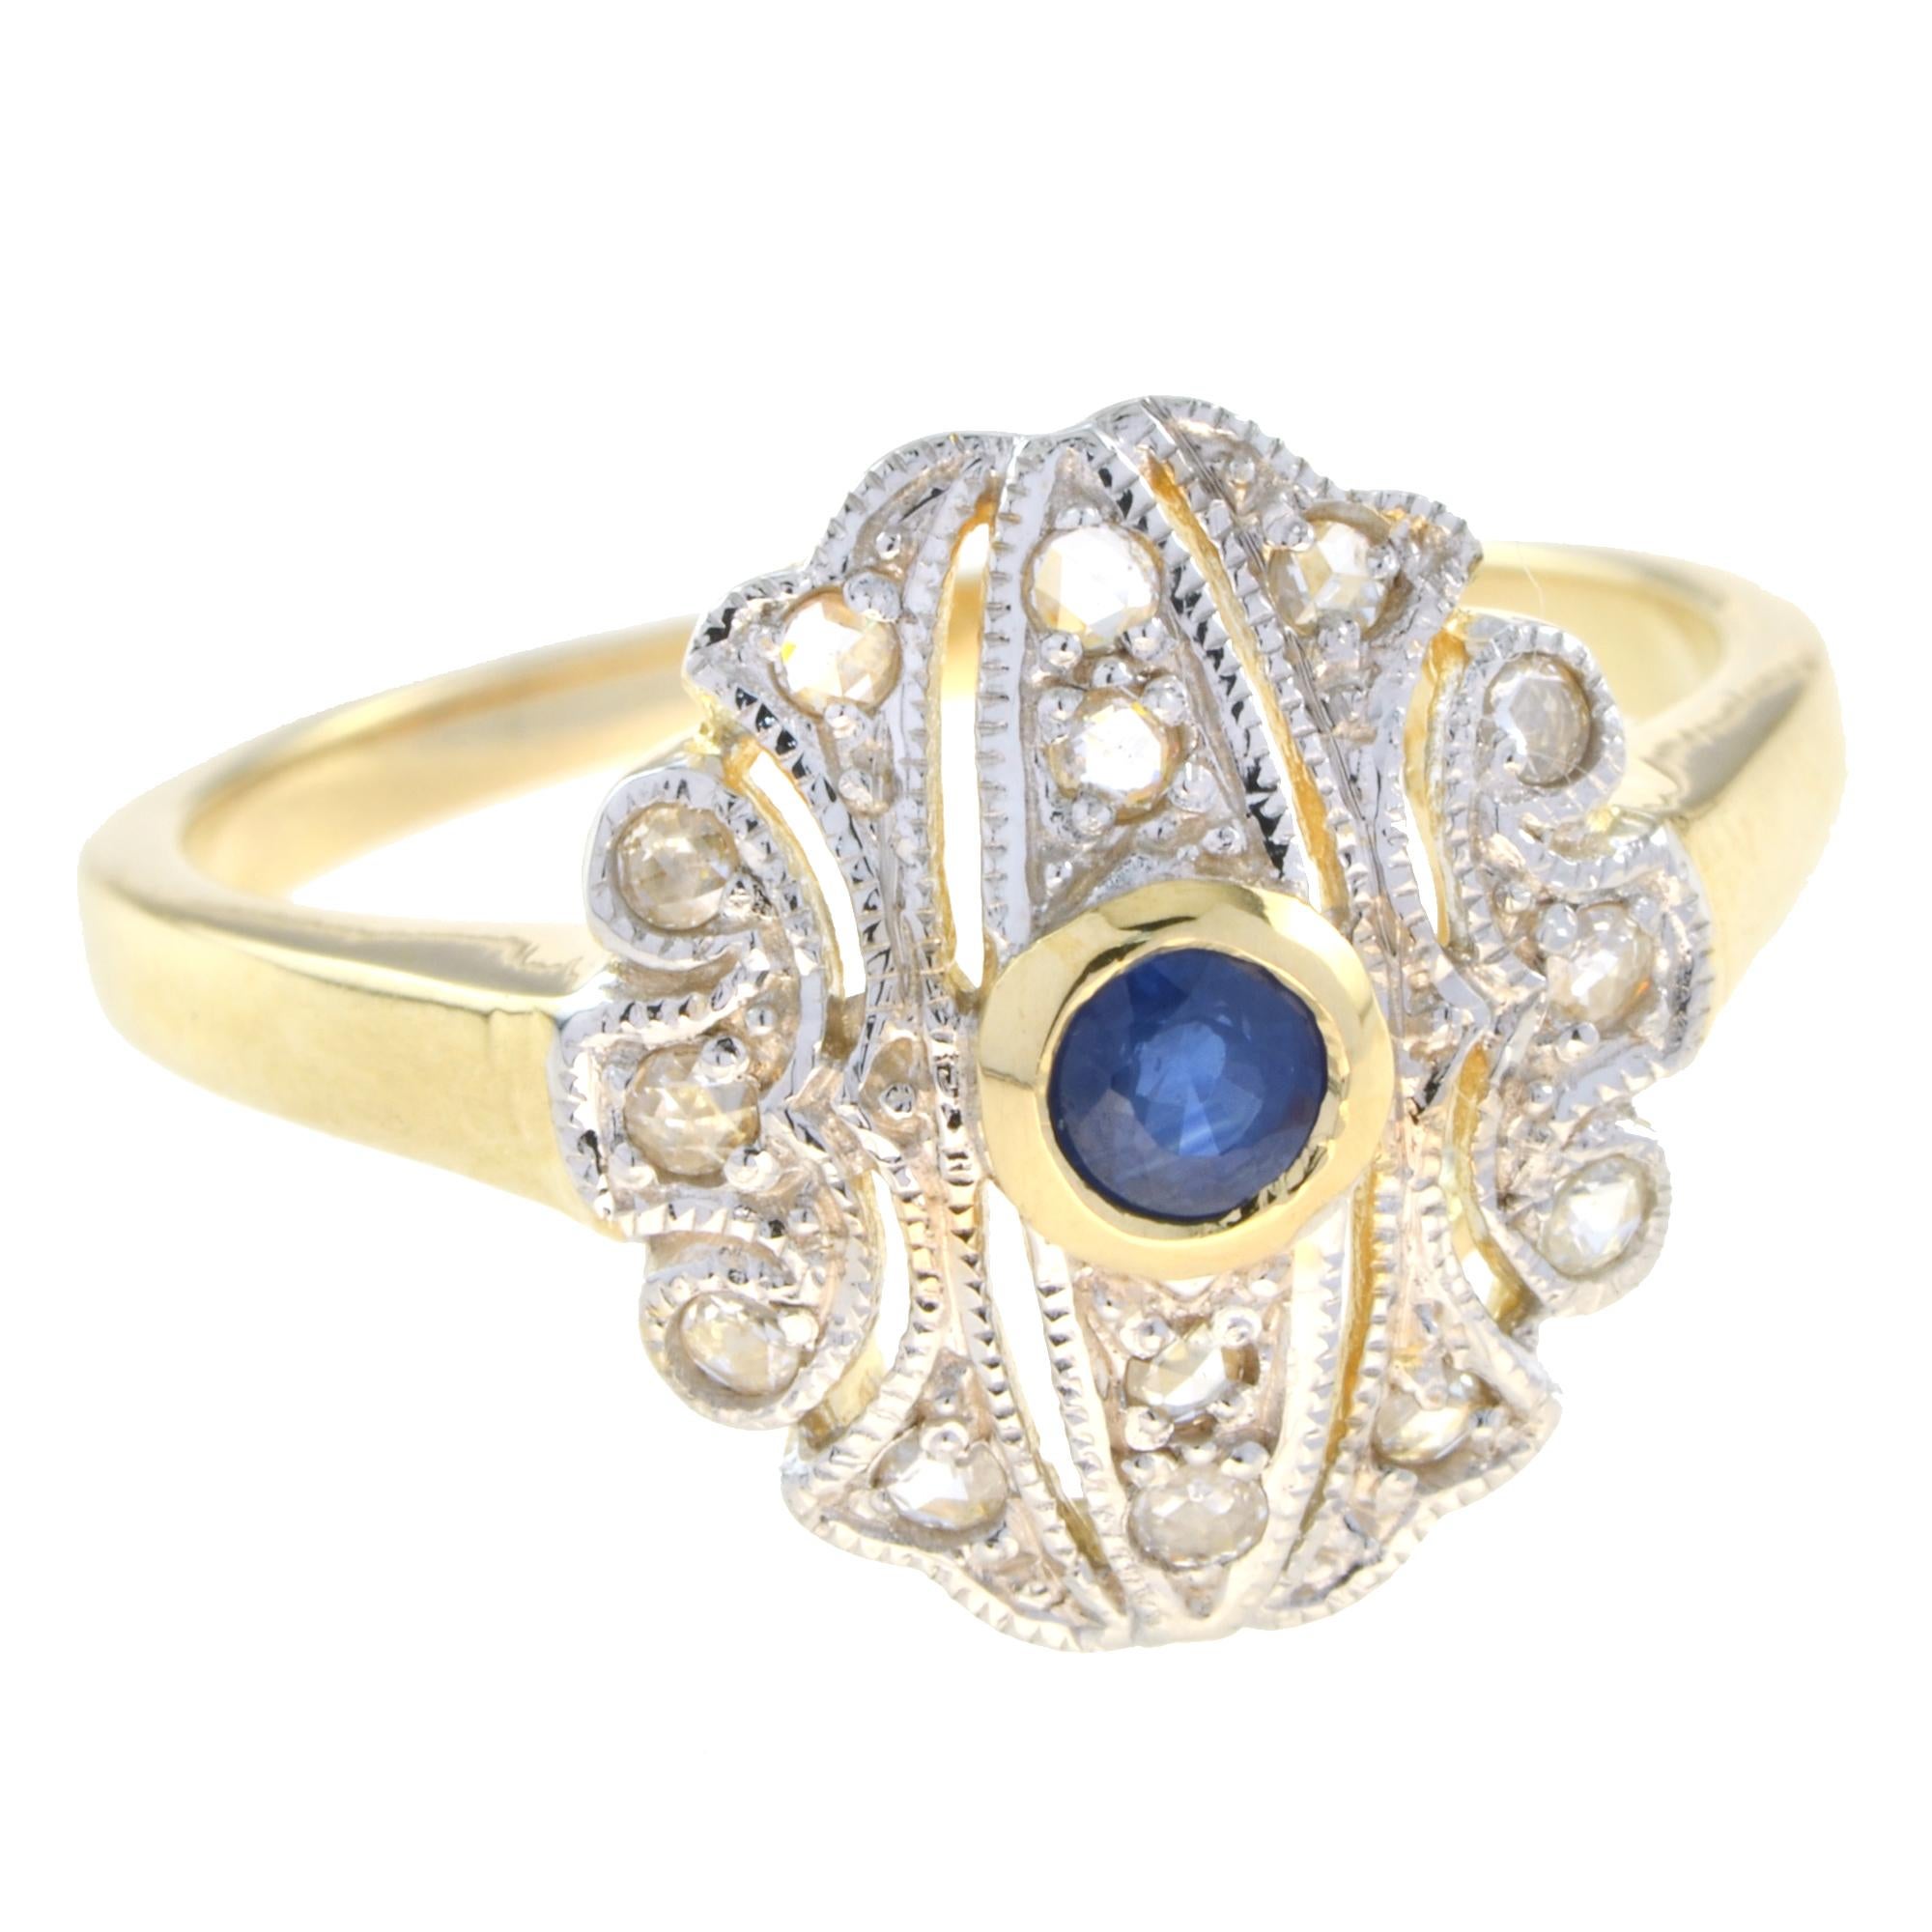 For Sale:  Antique Style Openwork Sapphire and Diamond Ring in 14K Yellow Gold 2